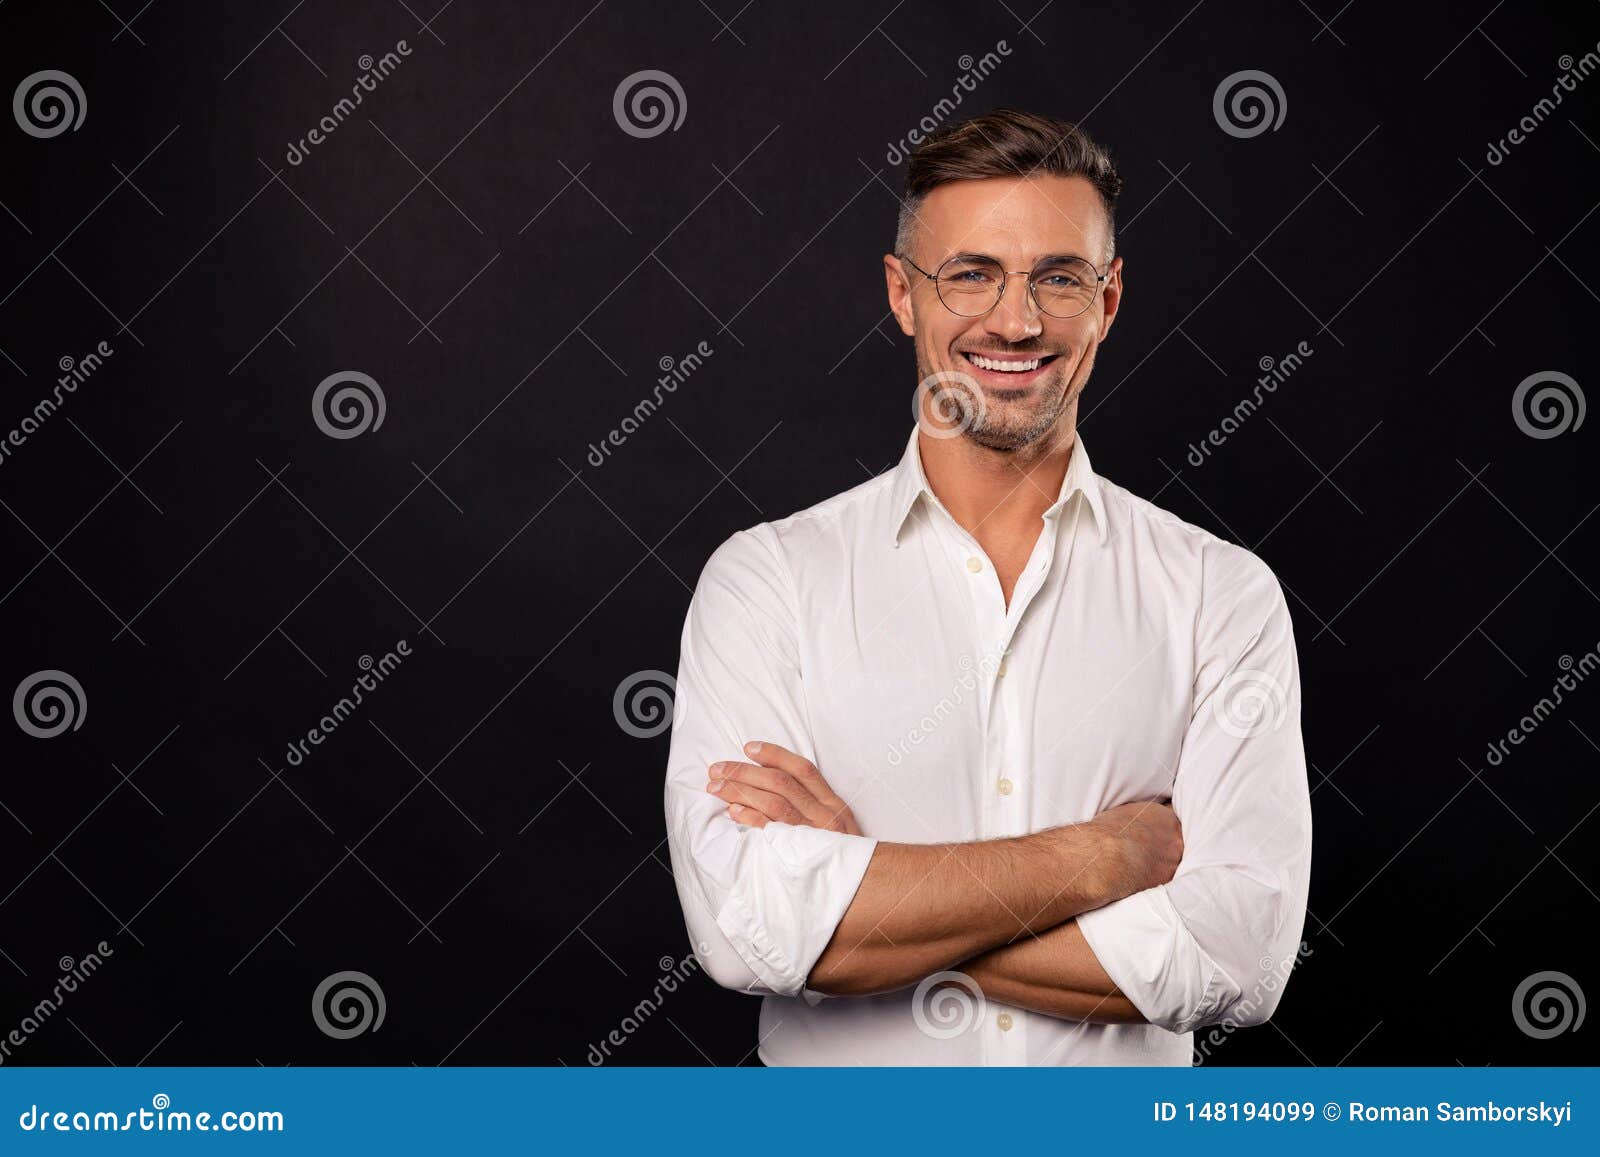 portrait of his he nice attractive content cheerful cheery guy geek it team lead consulting specialist expert shark